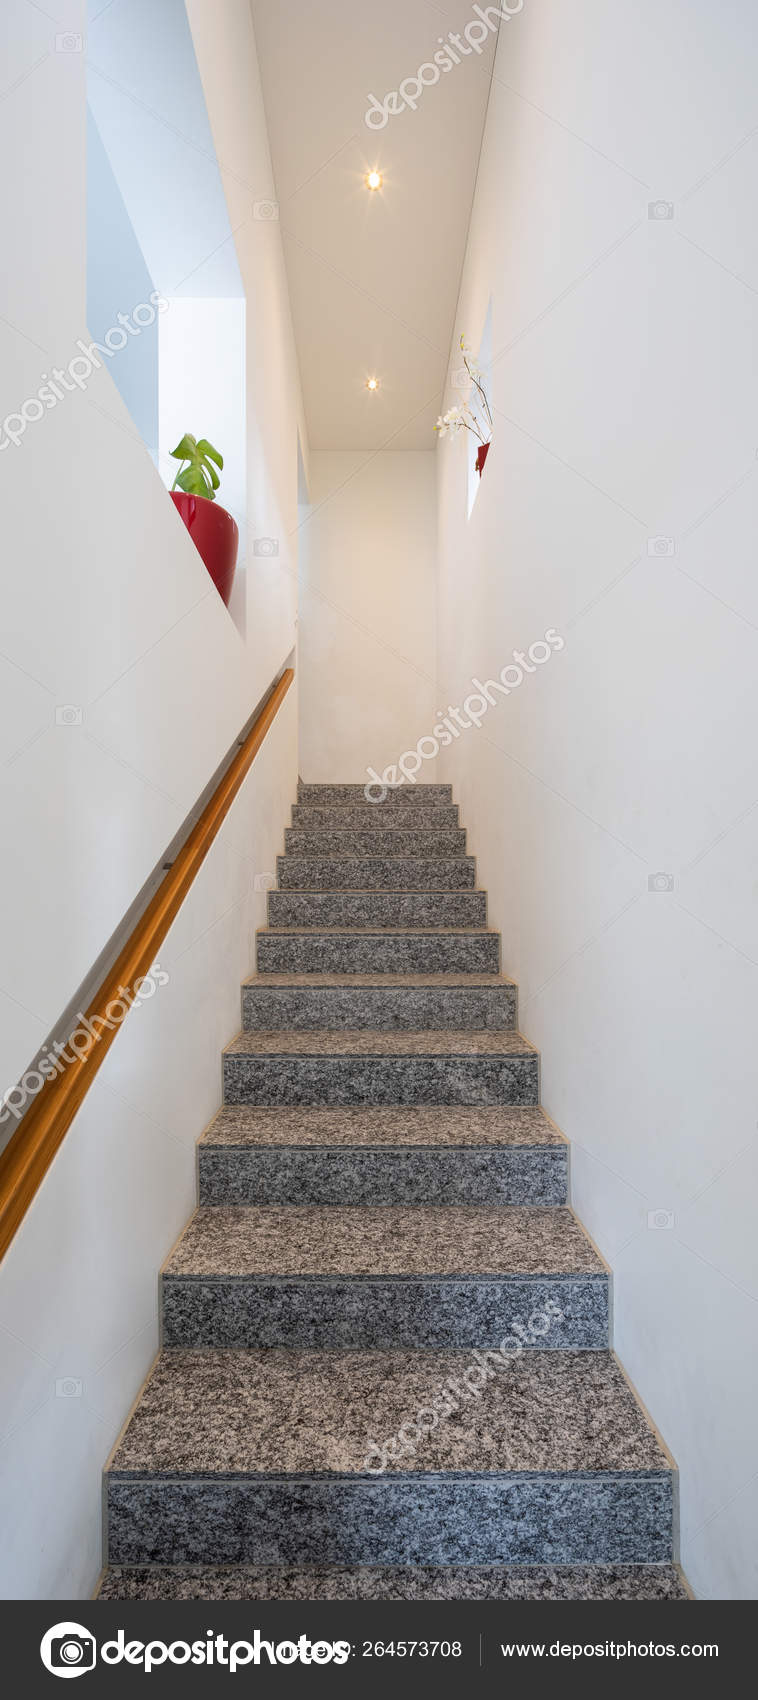 Marble Stairs With Wooden Handrails And Spotlights In The